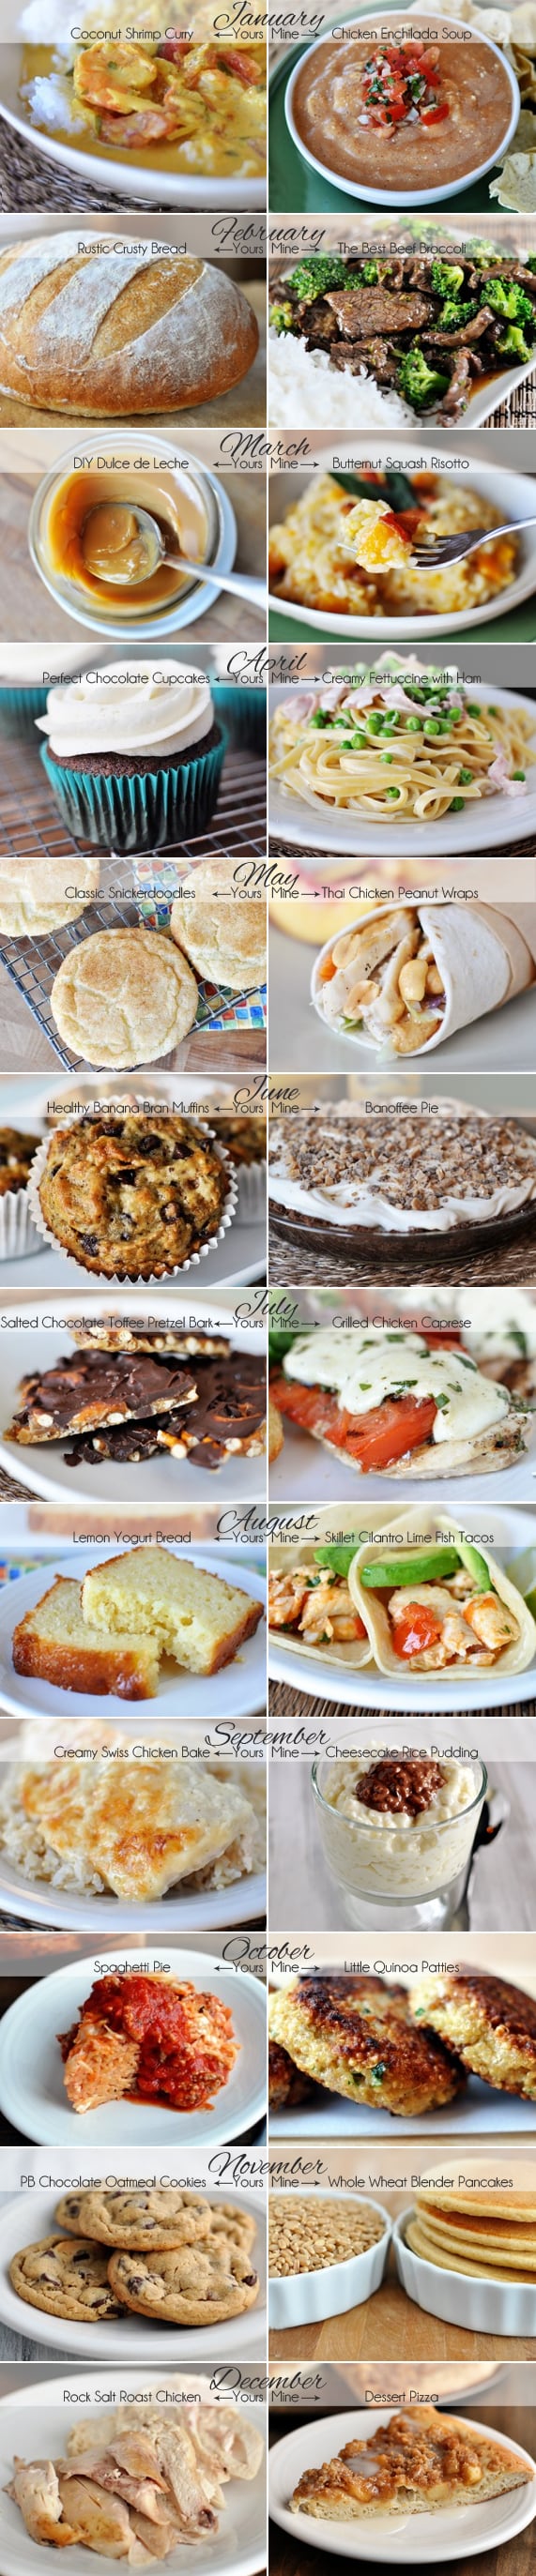 Mel's Kitchen Cafe Top 12 Recipes of 2012